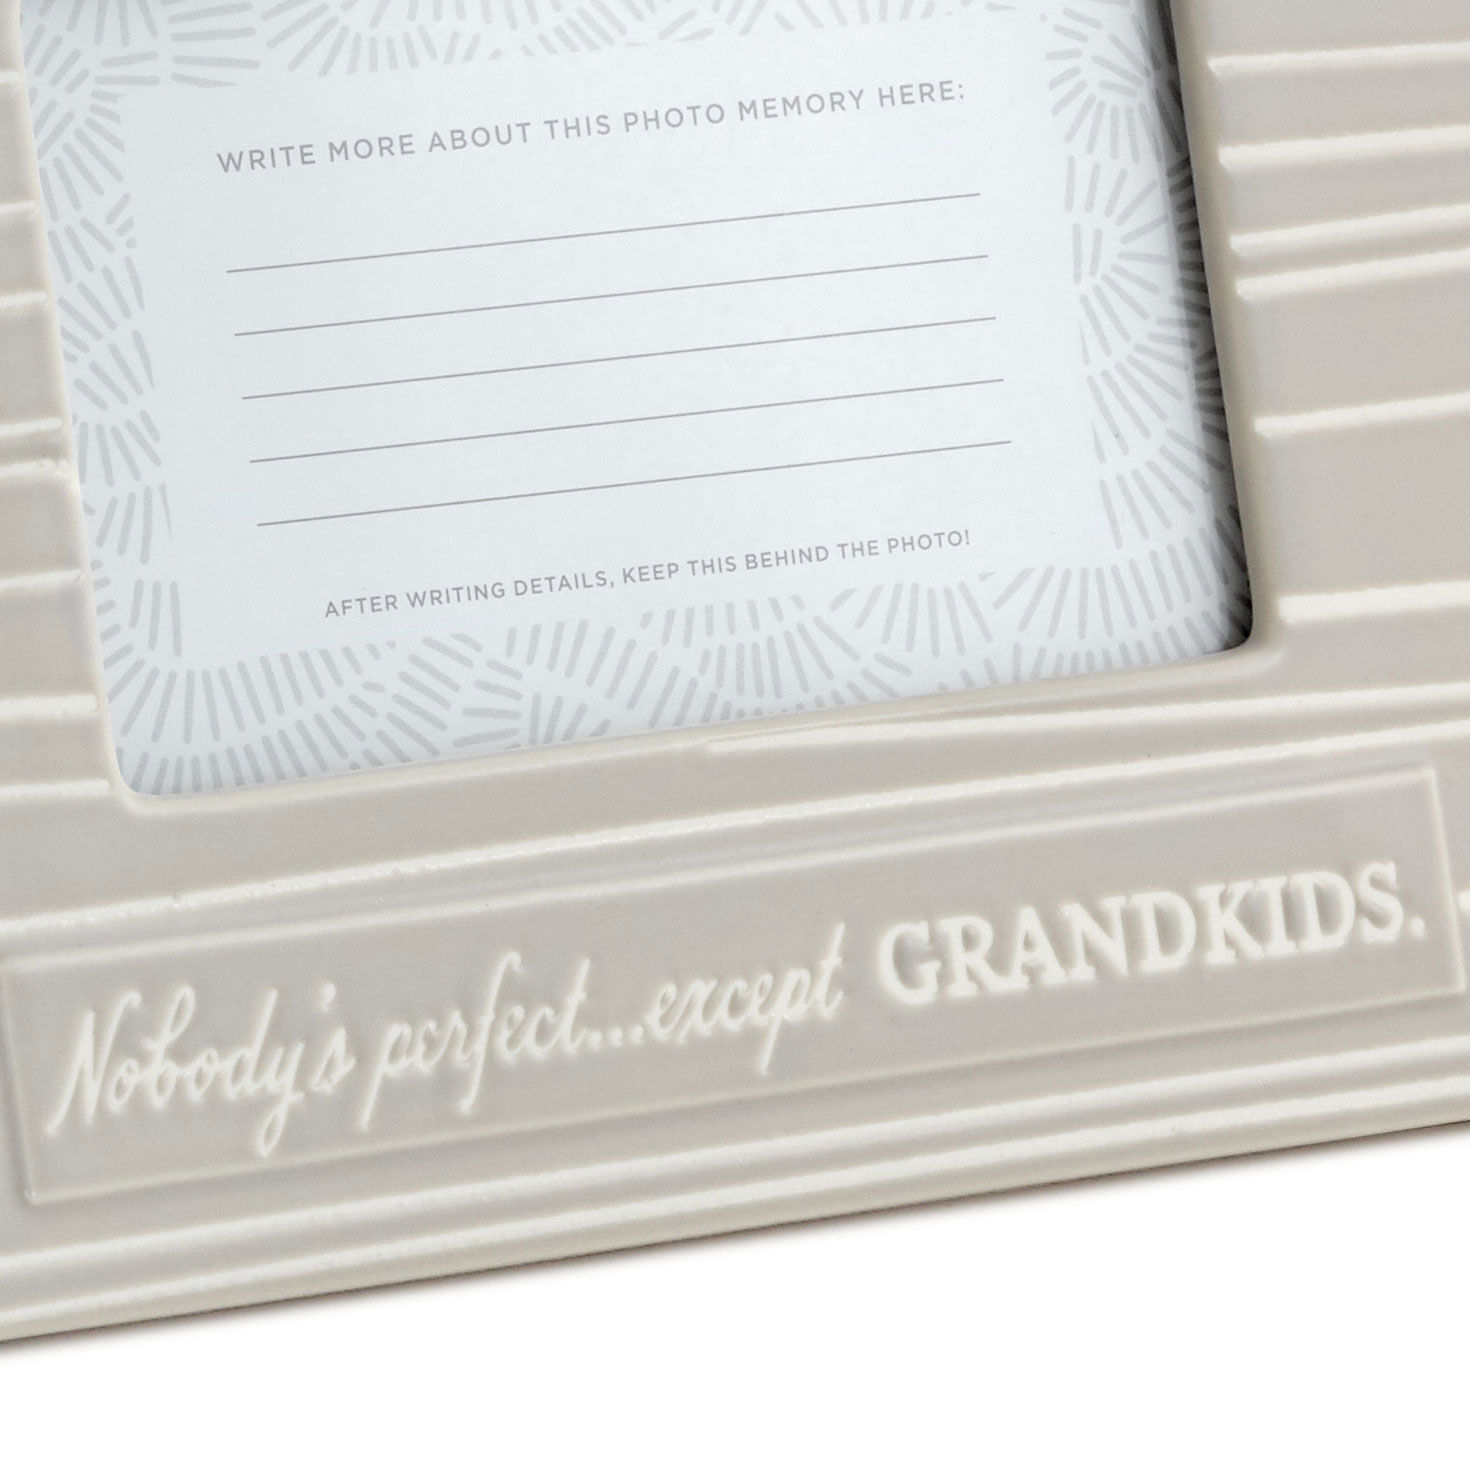 Nobody's Perfect Except Grandkids Picture Frame, 4x6 for only USD 22.99 | Hallmark